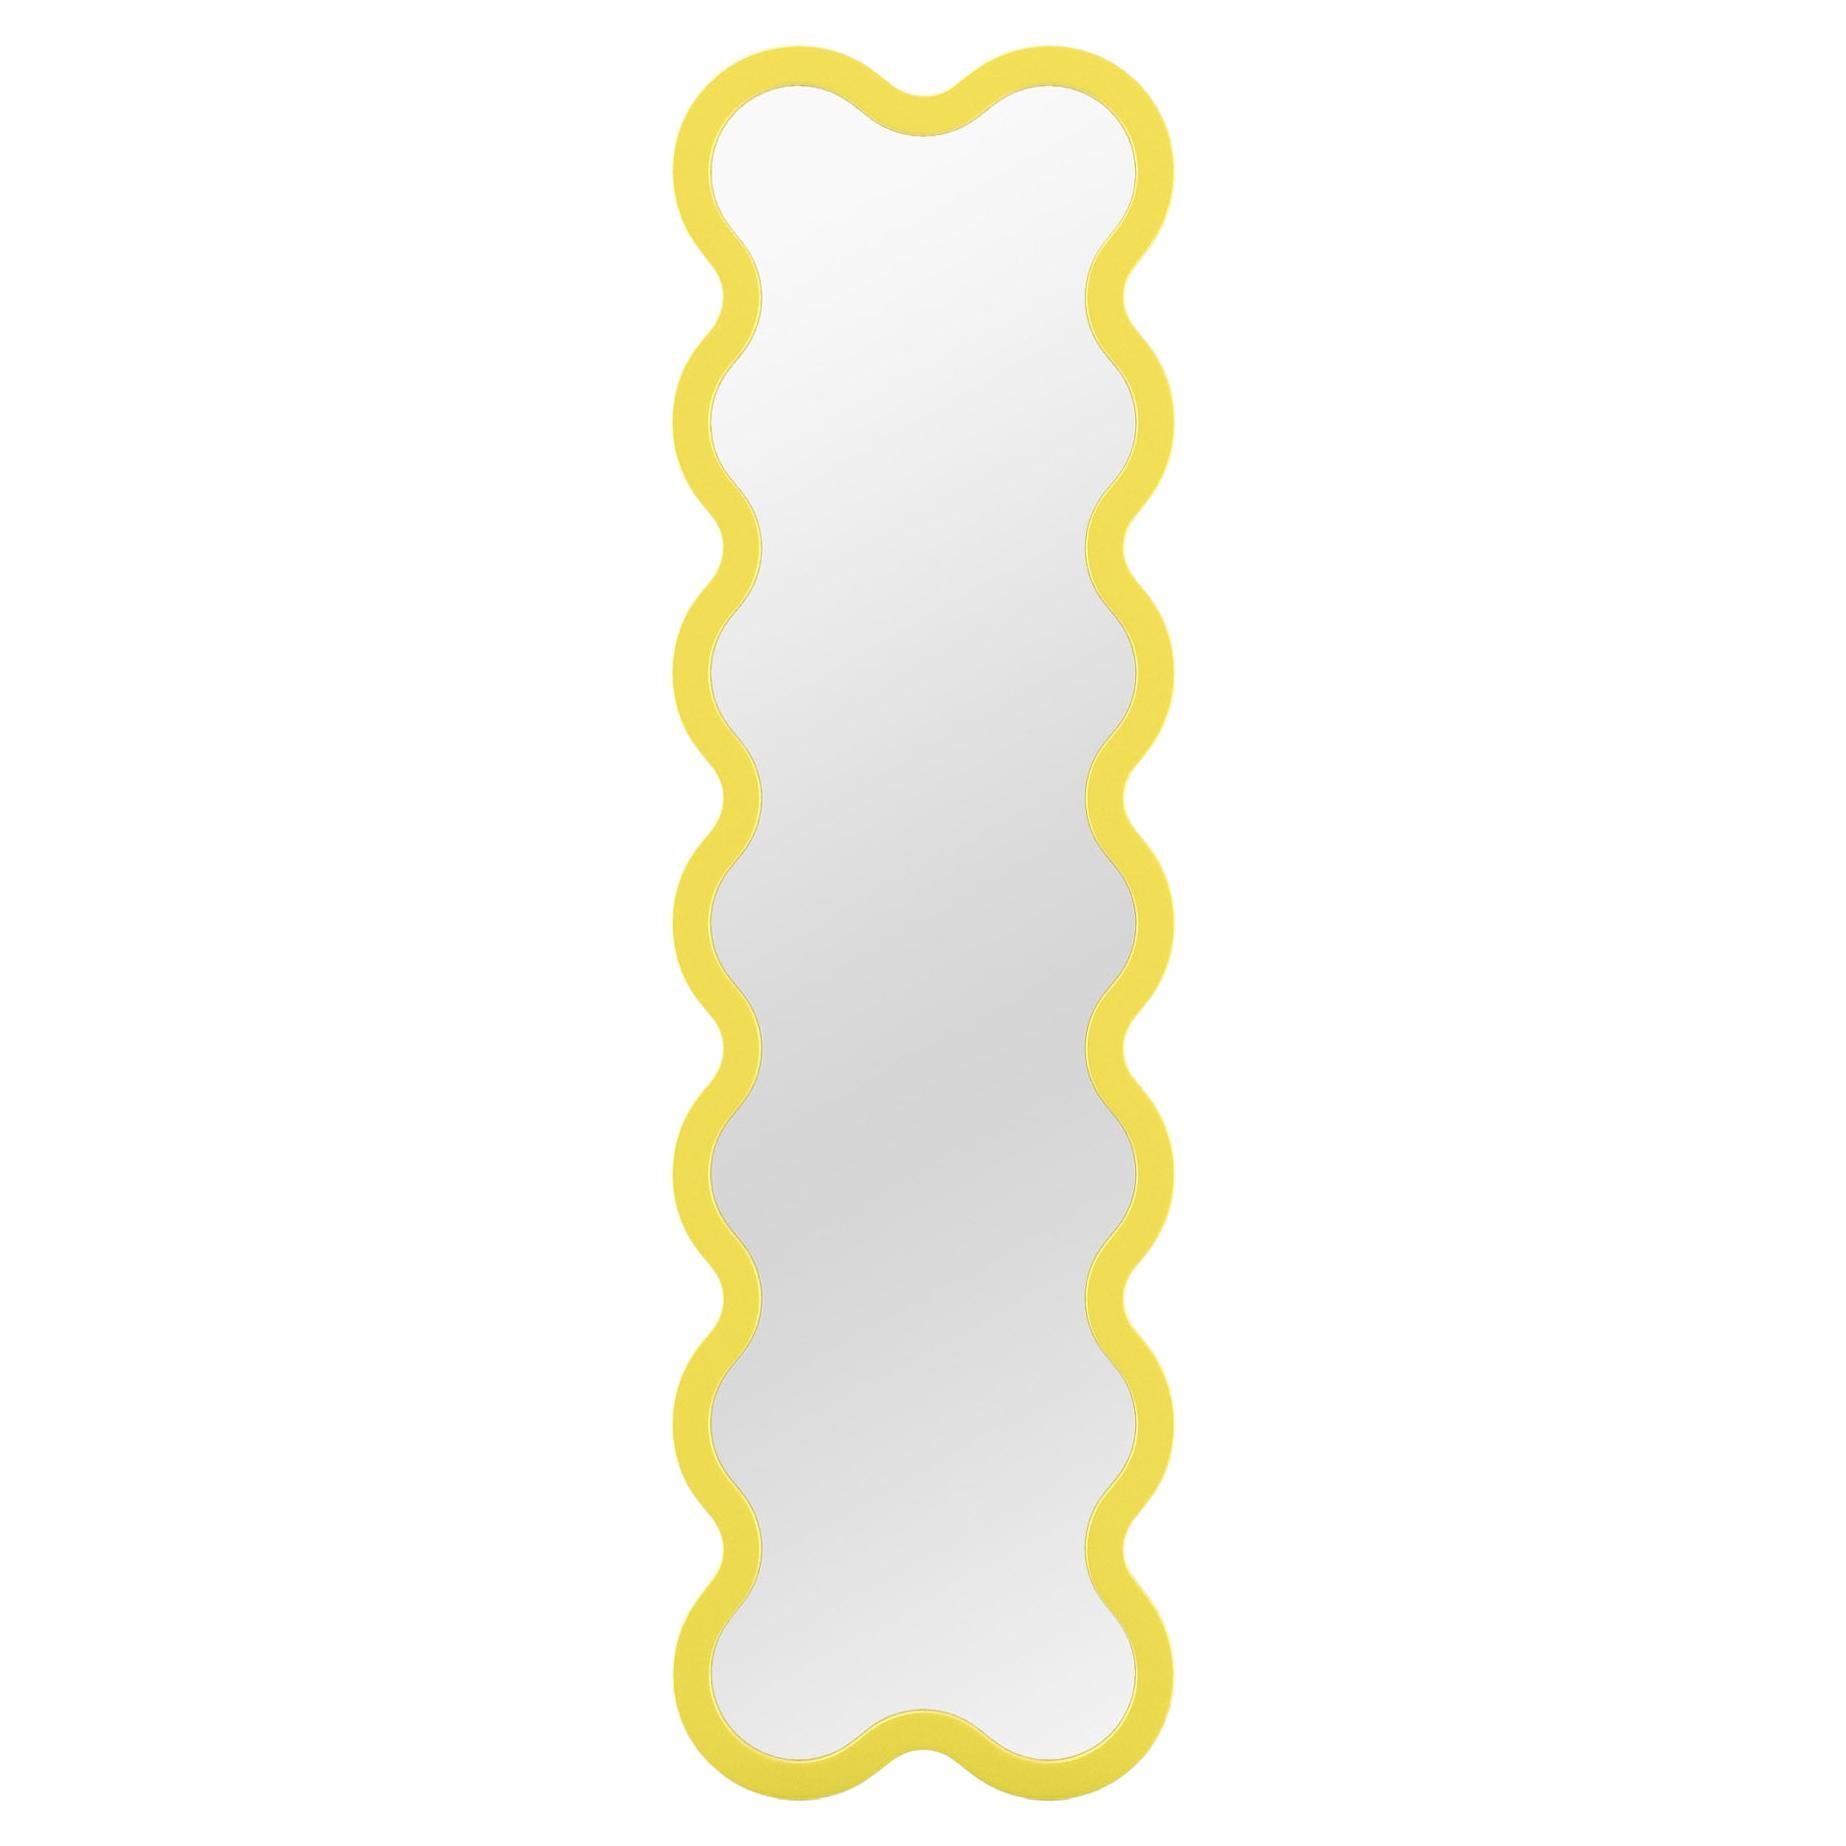 Contemporary Mirror 'Hvyli 14' by Oitoproducts, Yellow Frame